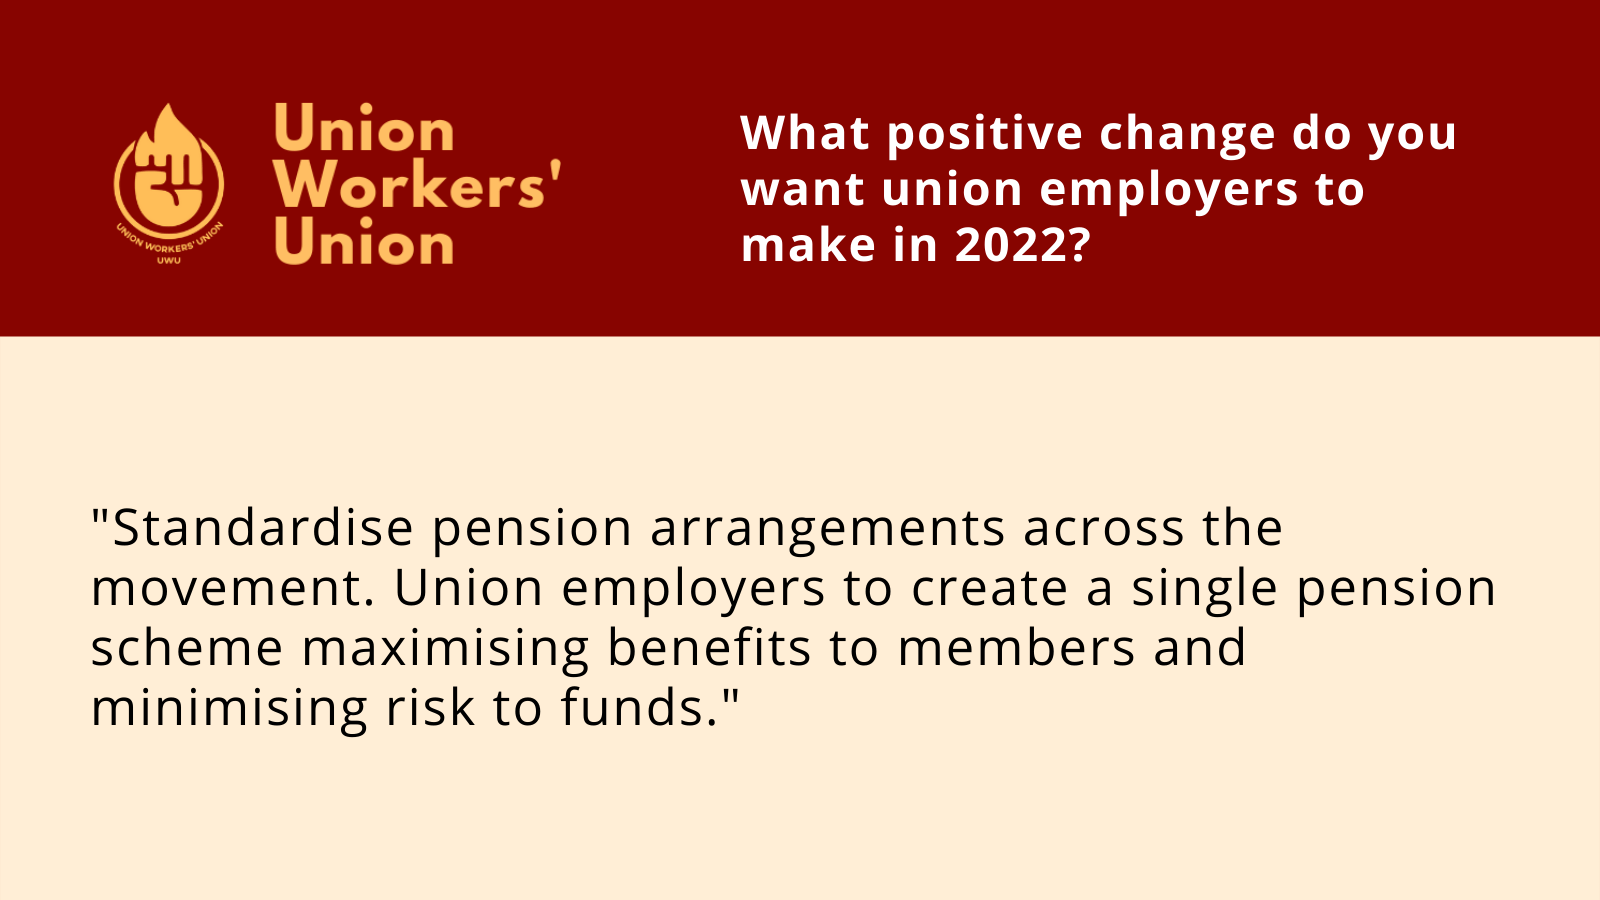 UWU logo next to the question, what positive change do you want union employers to make in 2022? Member response: Standardise pension arrangements across the movement. Union employers to create a single pension scheme maximising benefits to members and minimising risk to funds.